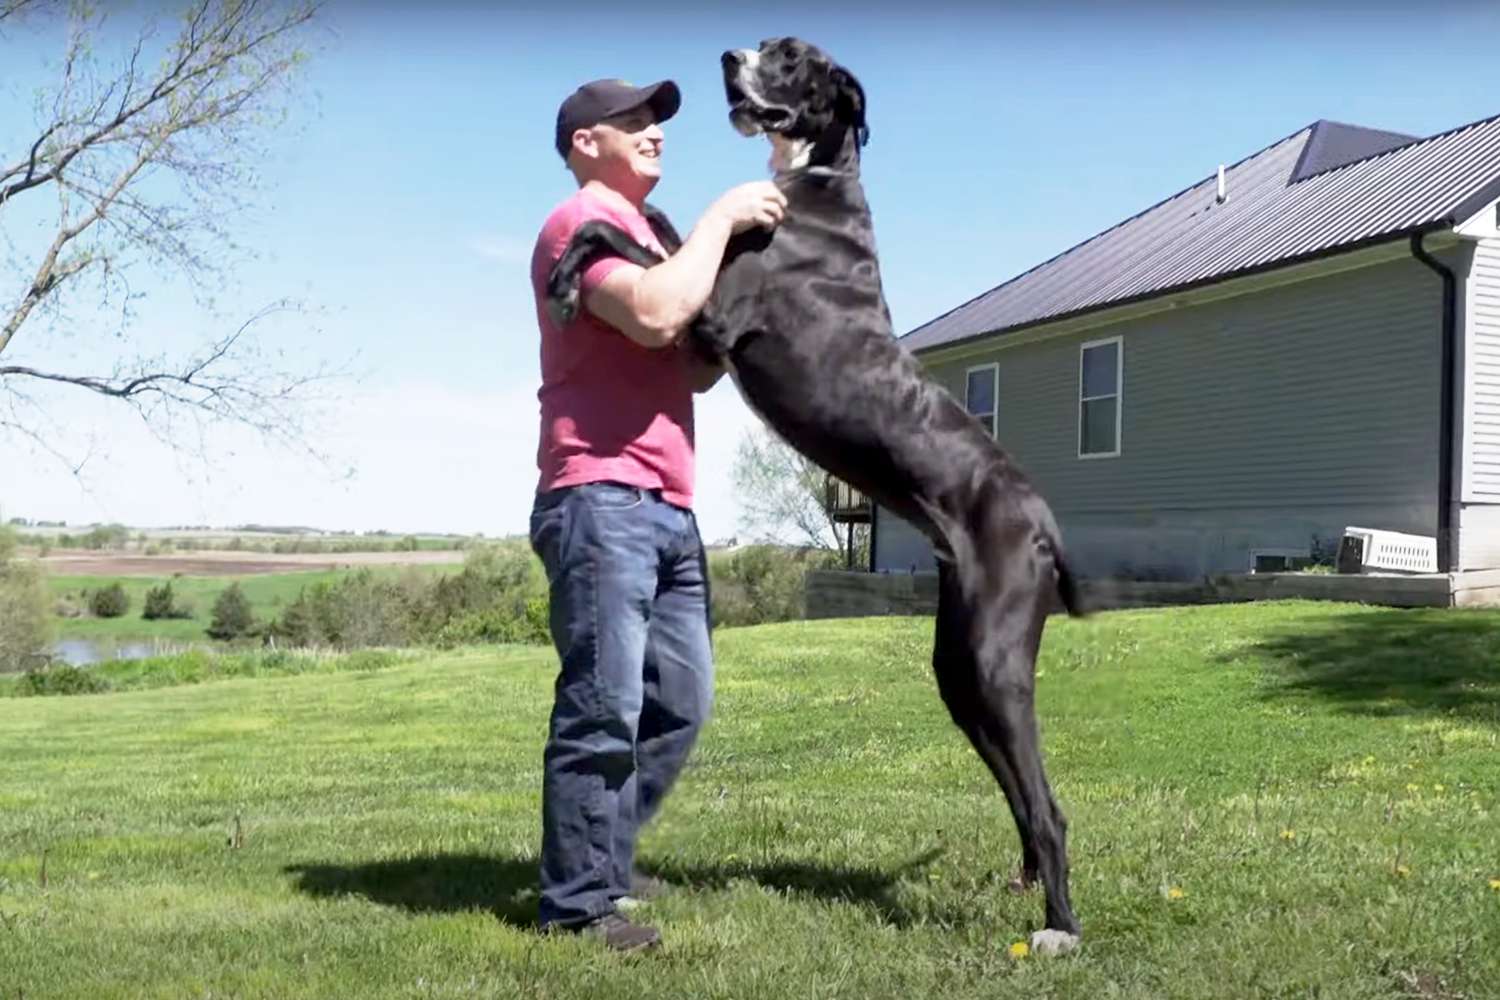 Worlds Tallest Dog Dies Days After Getting Record [Video]